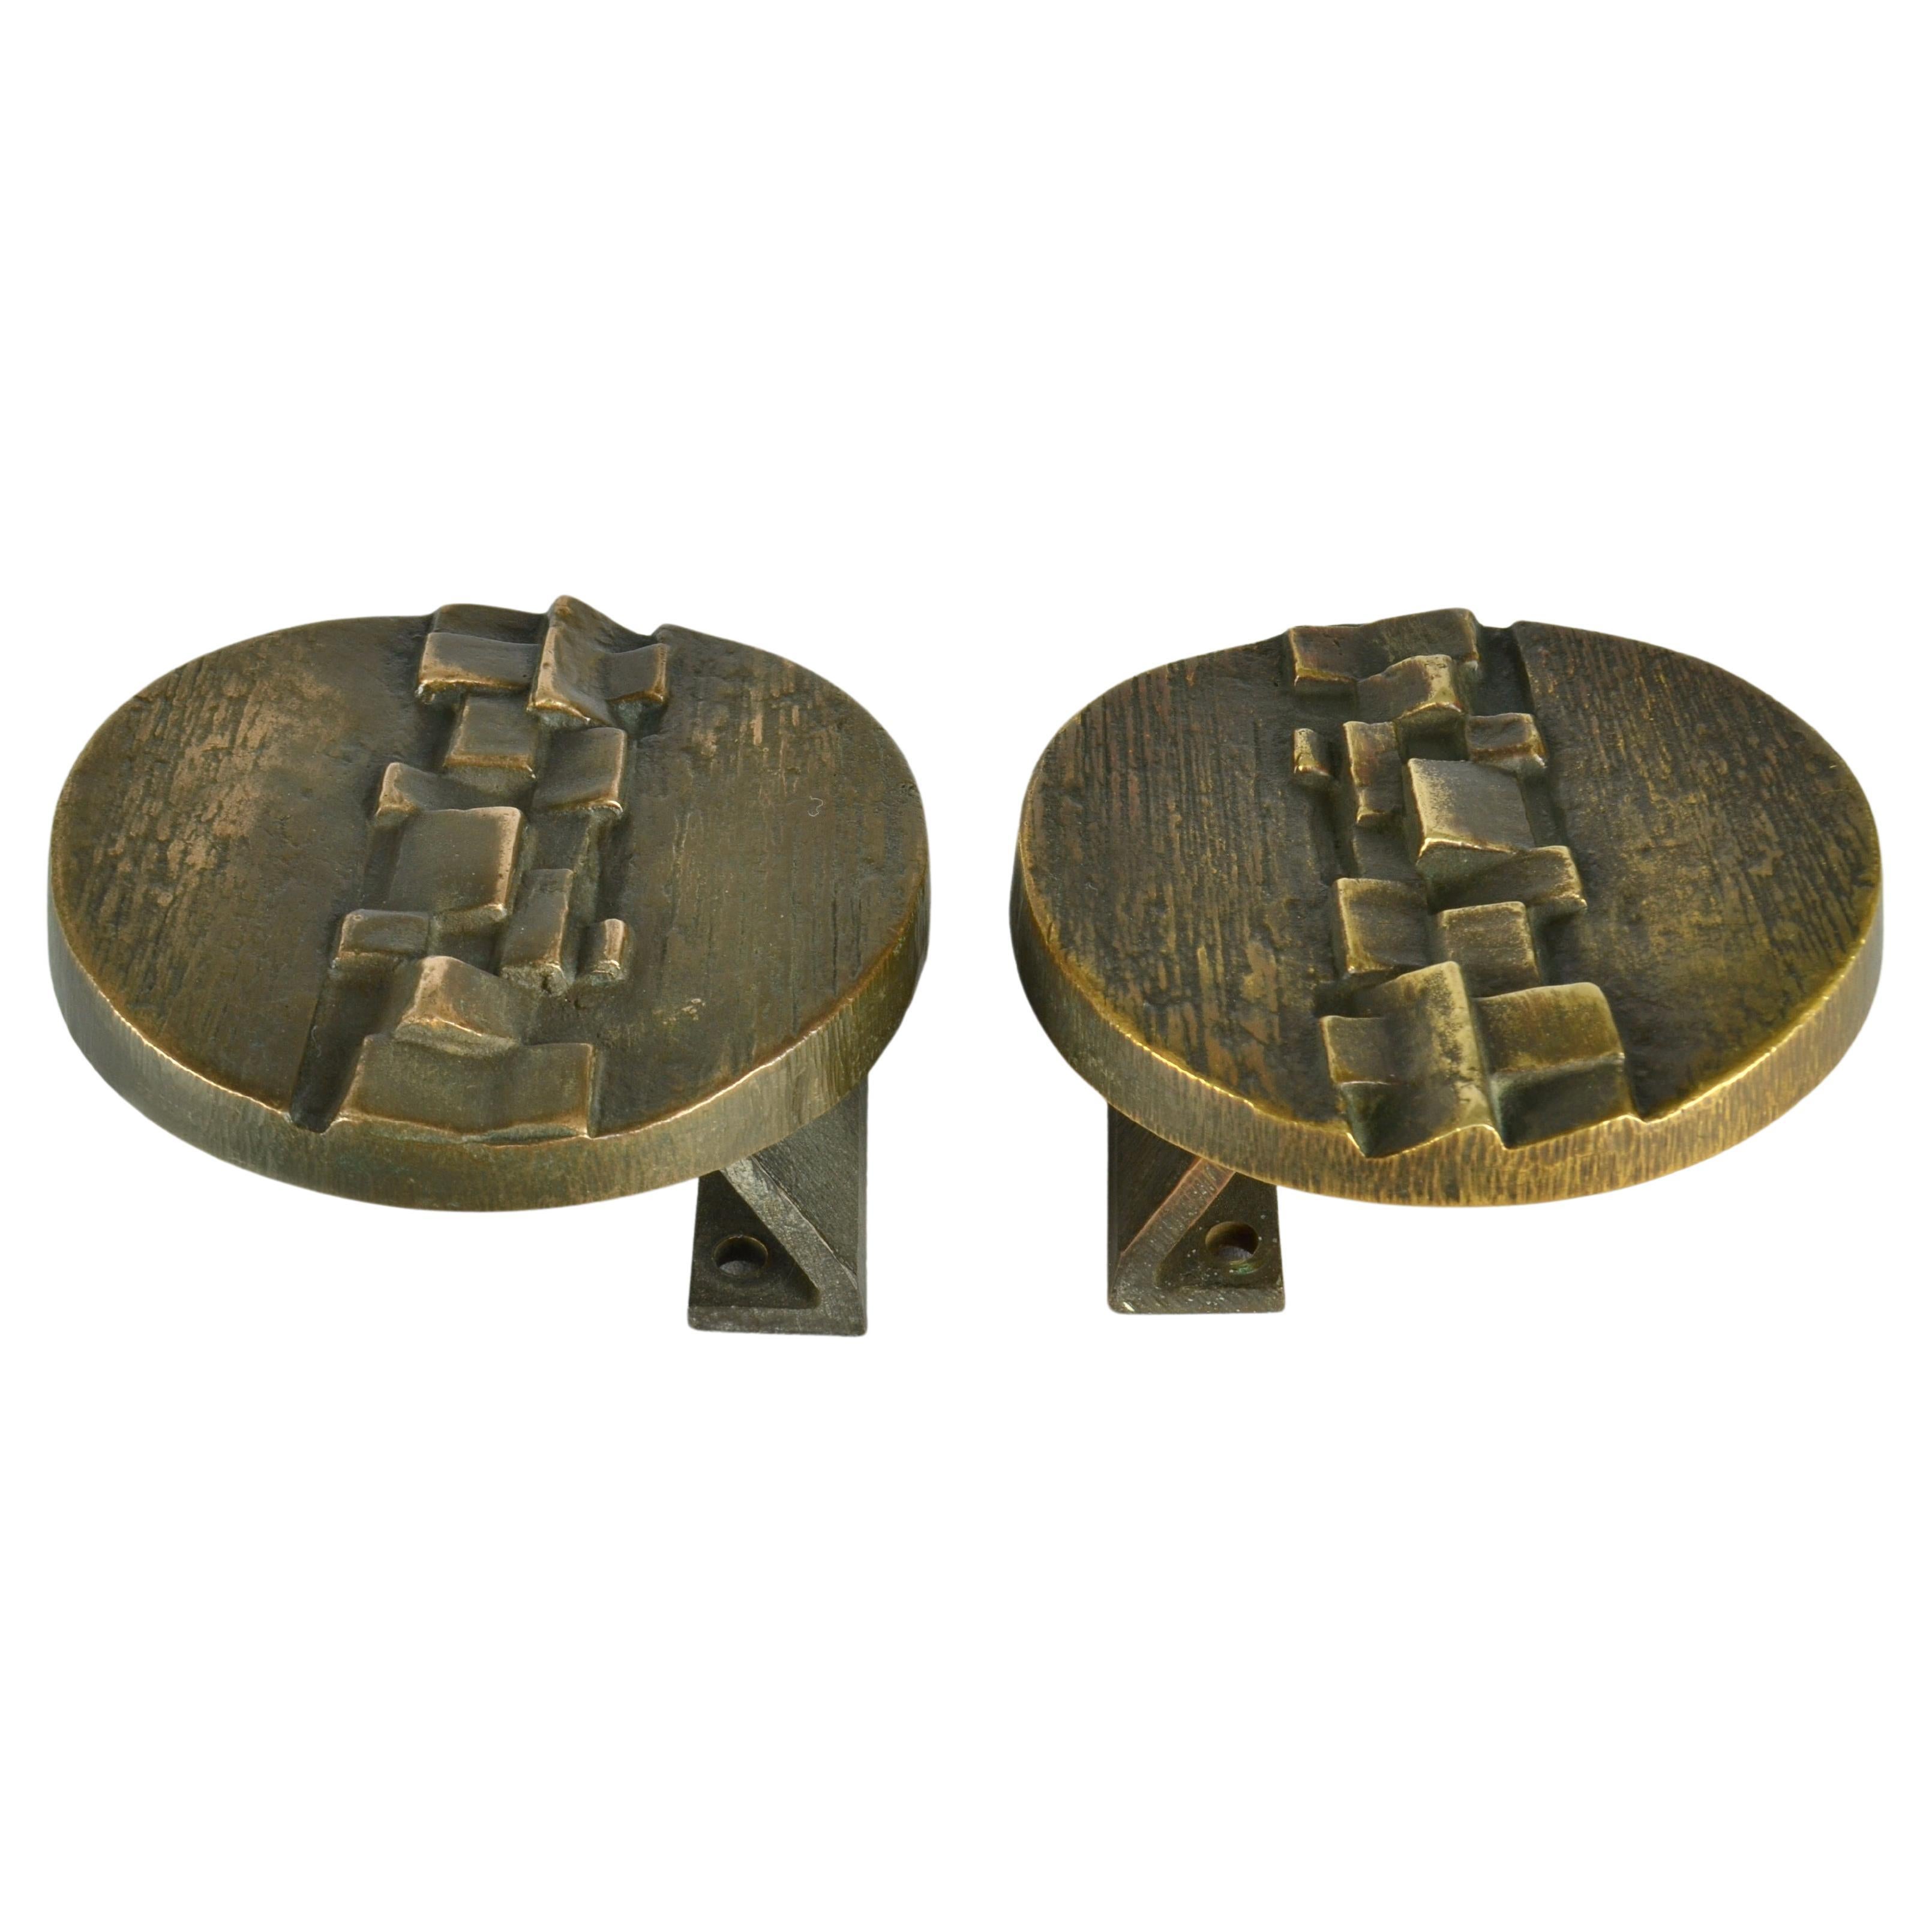 Architectural Pair of Bronze Round Push Pull Door Handles with Geometric Relief